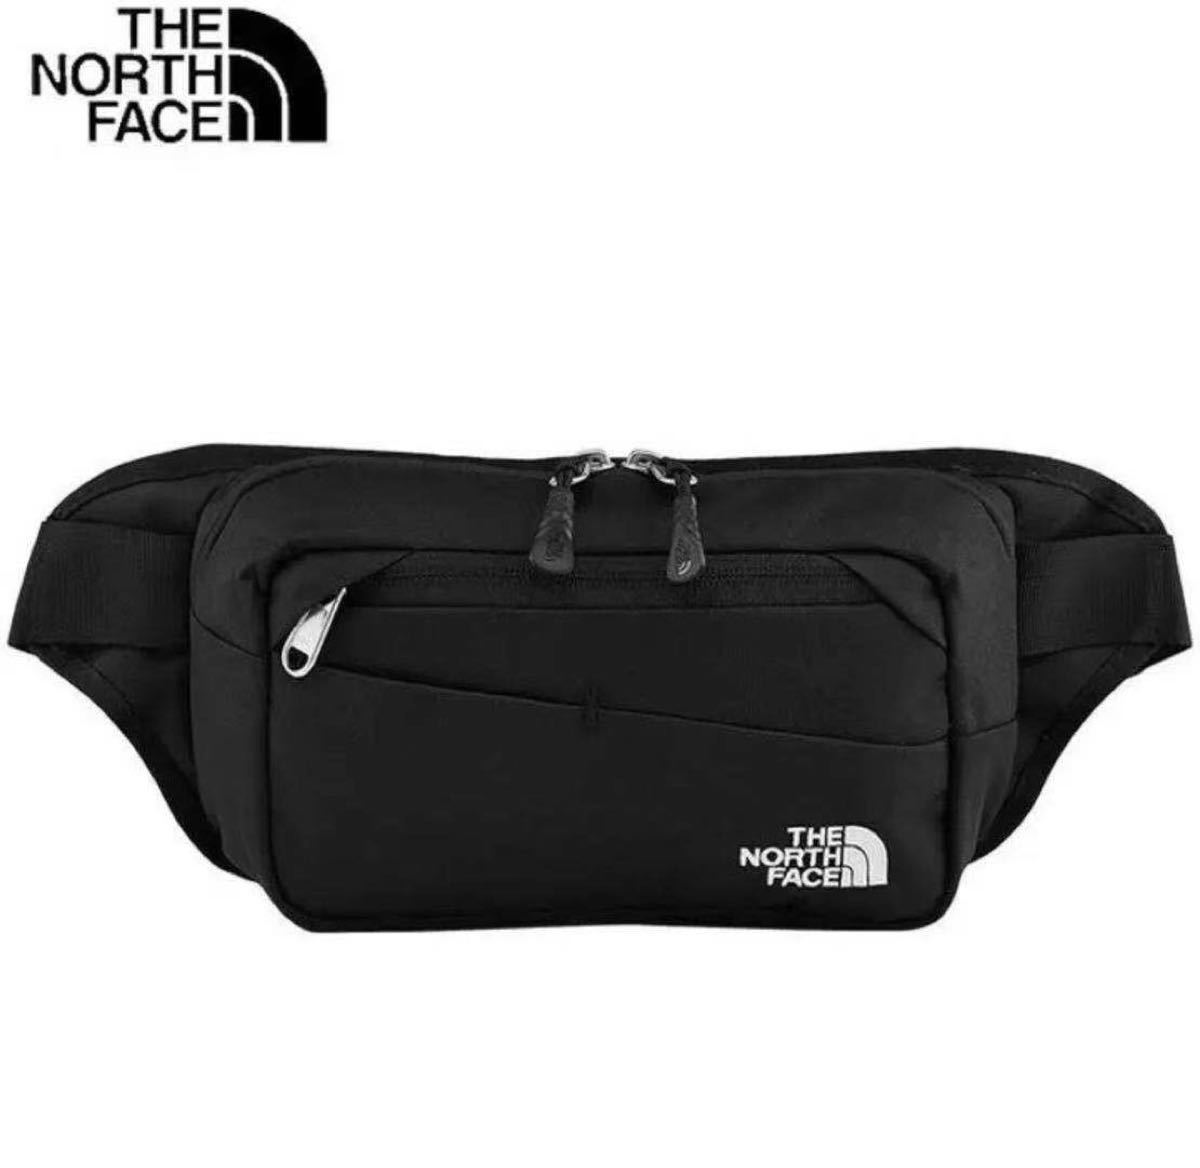 THE NORTH FACE ボディバッグ ウエストバッグ ウエストポーチ